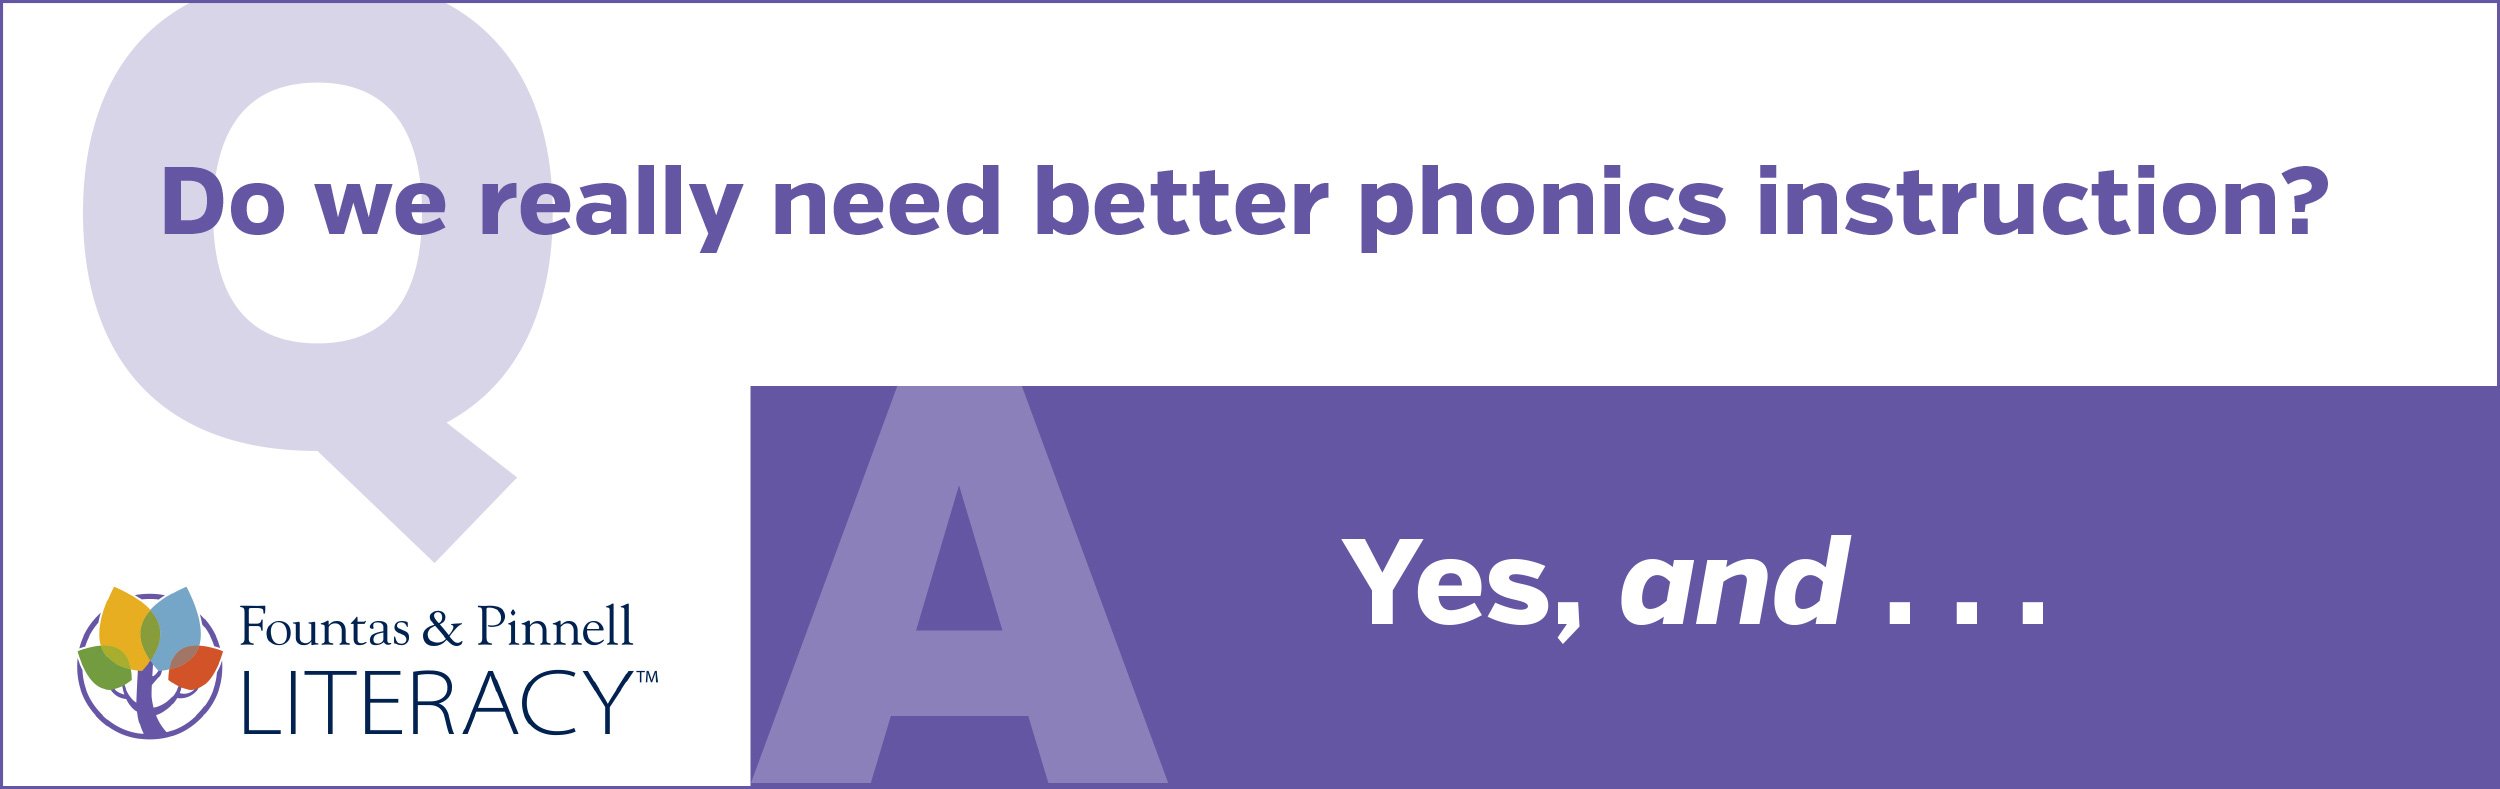 Blog Title: Question: Do we really need better phonics instruction? Answer: Yes, and…